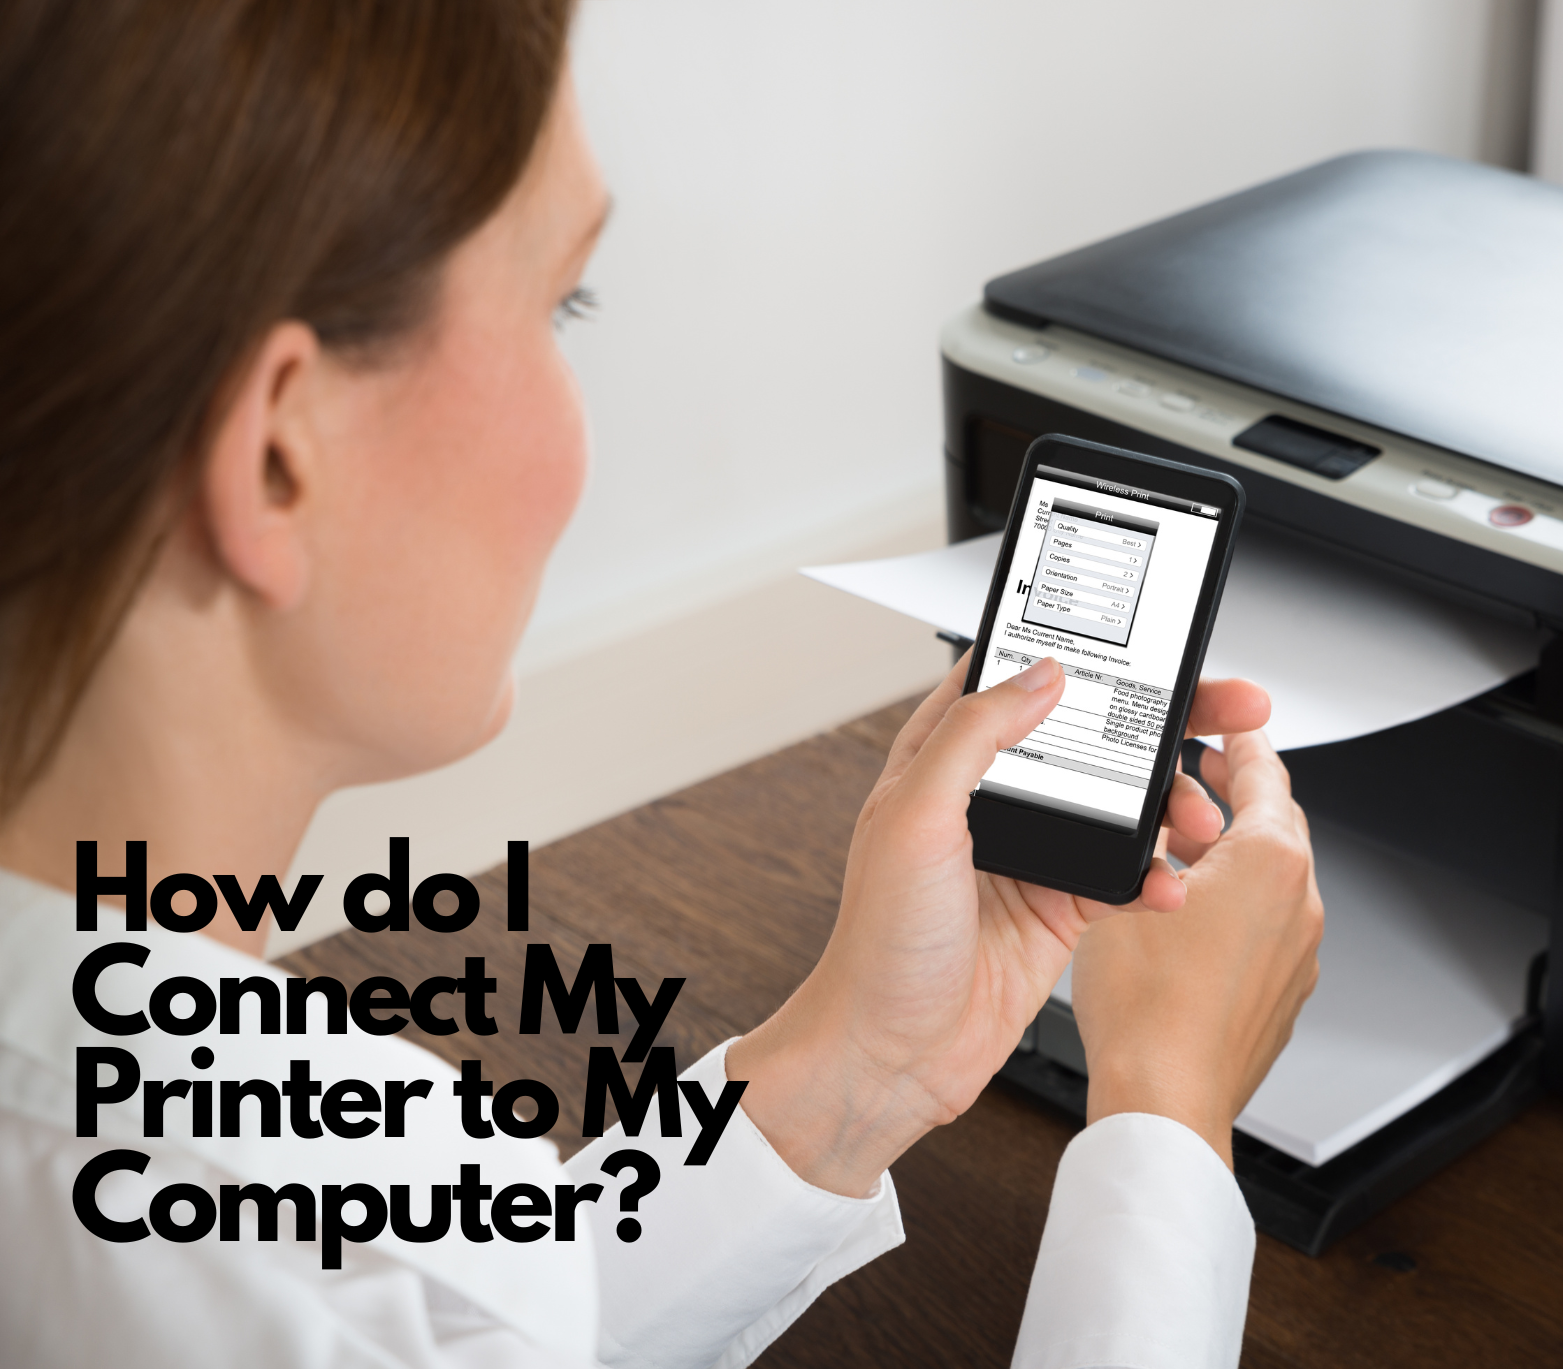 How do I connect my printer to my computer text over a woman holding a mobile phone